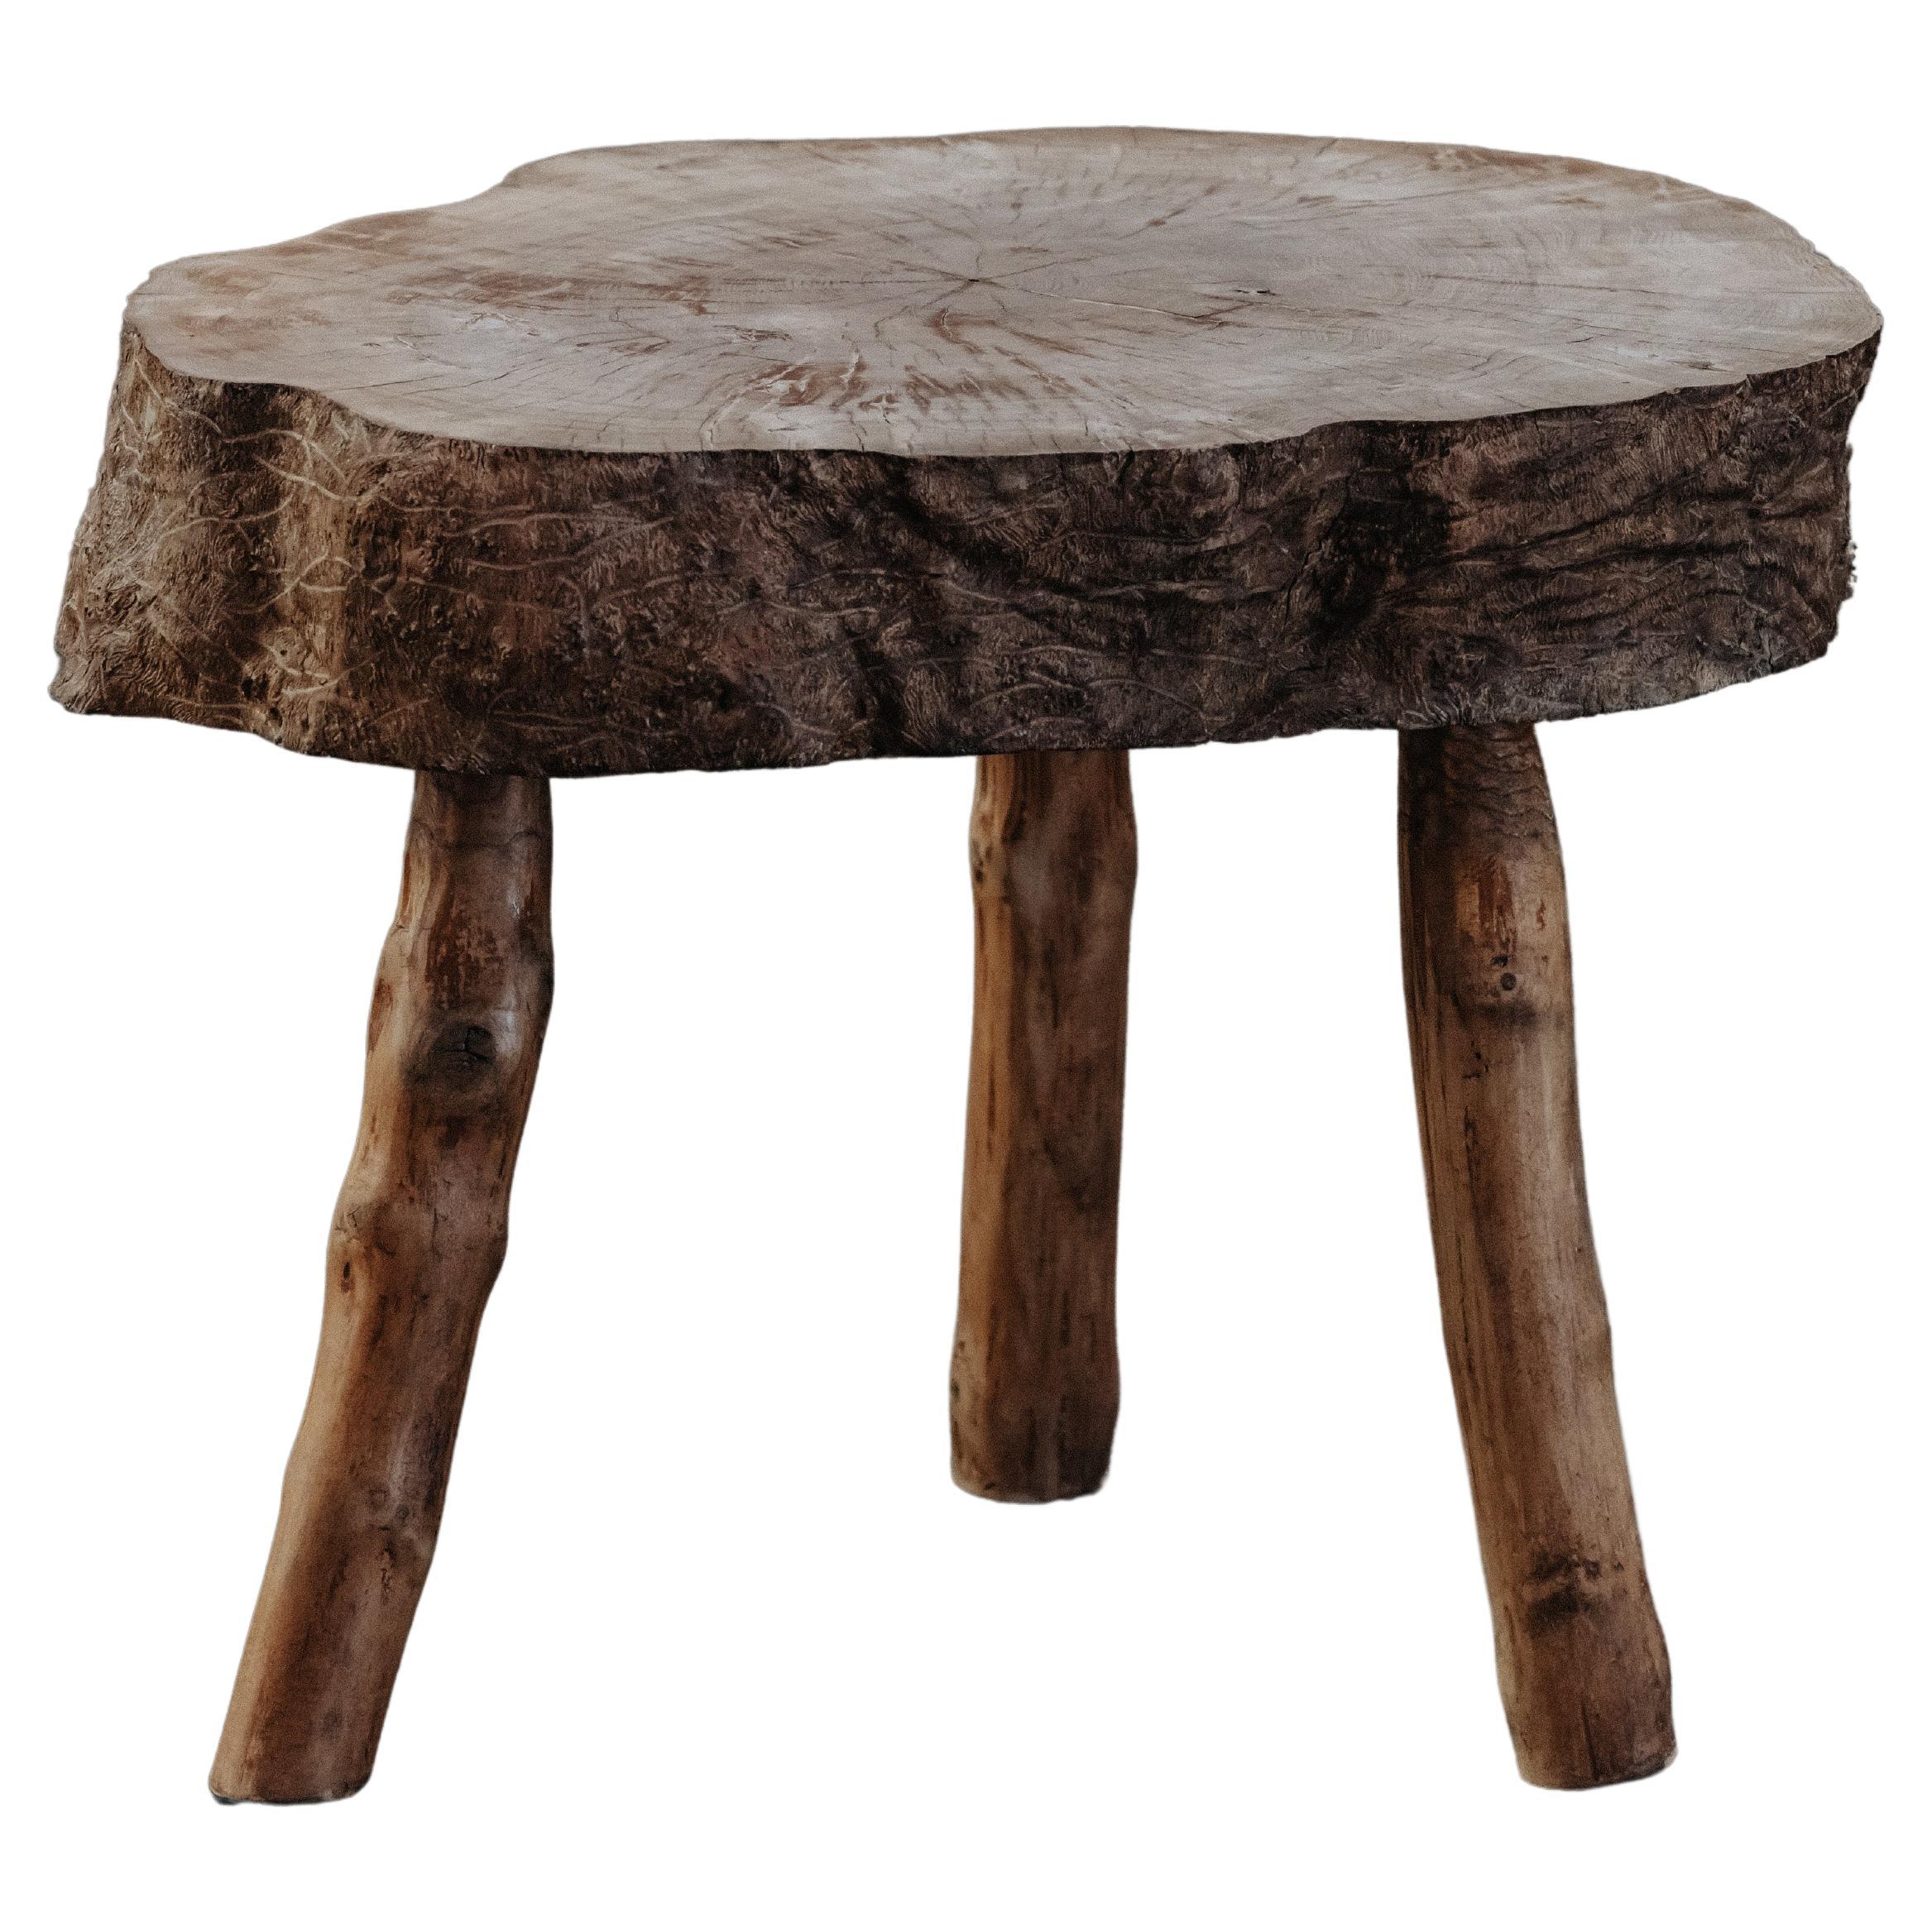 Vintage Live Edge Side Table From France, Circa 1970